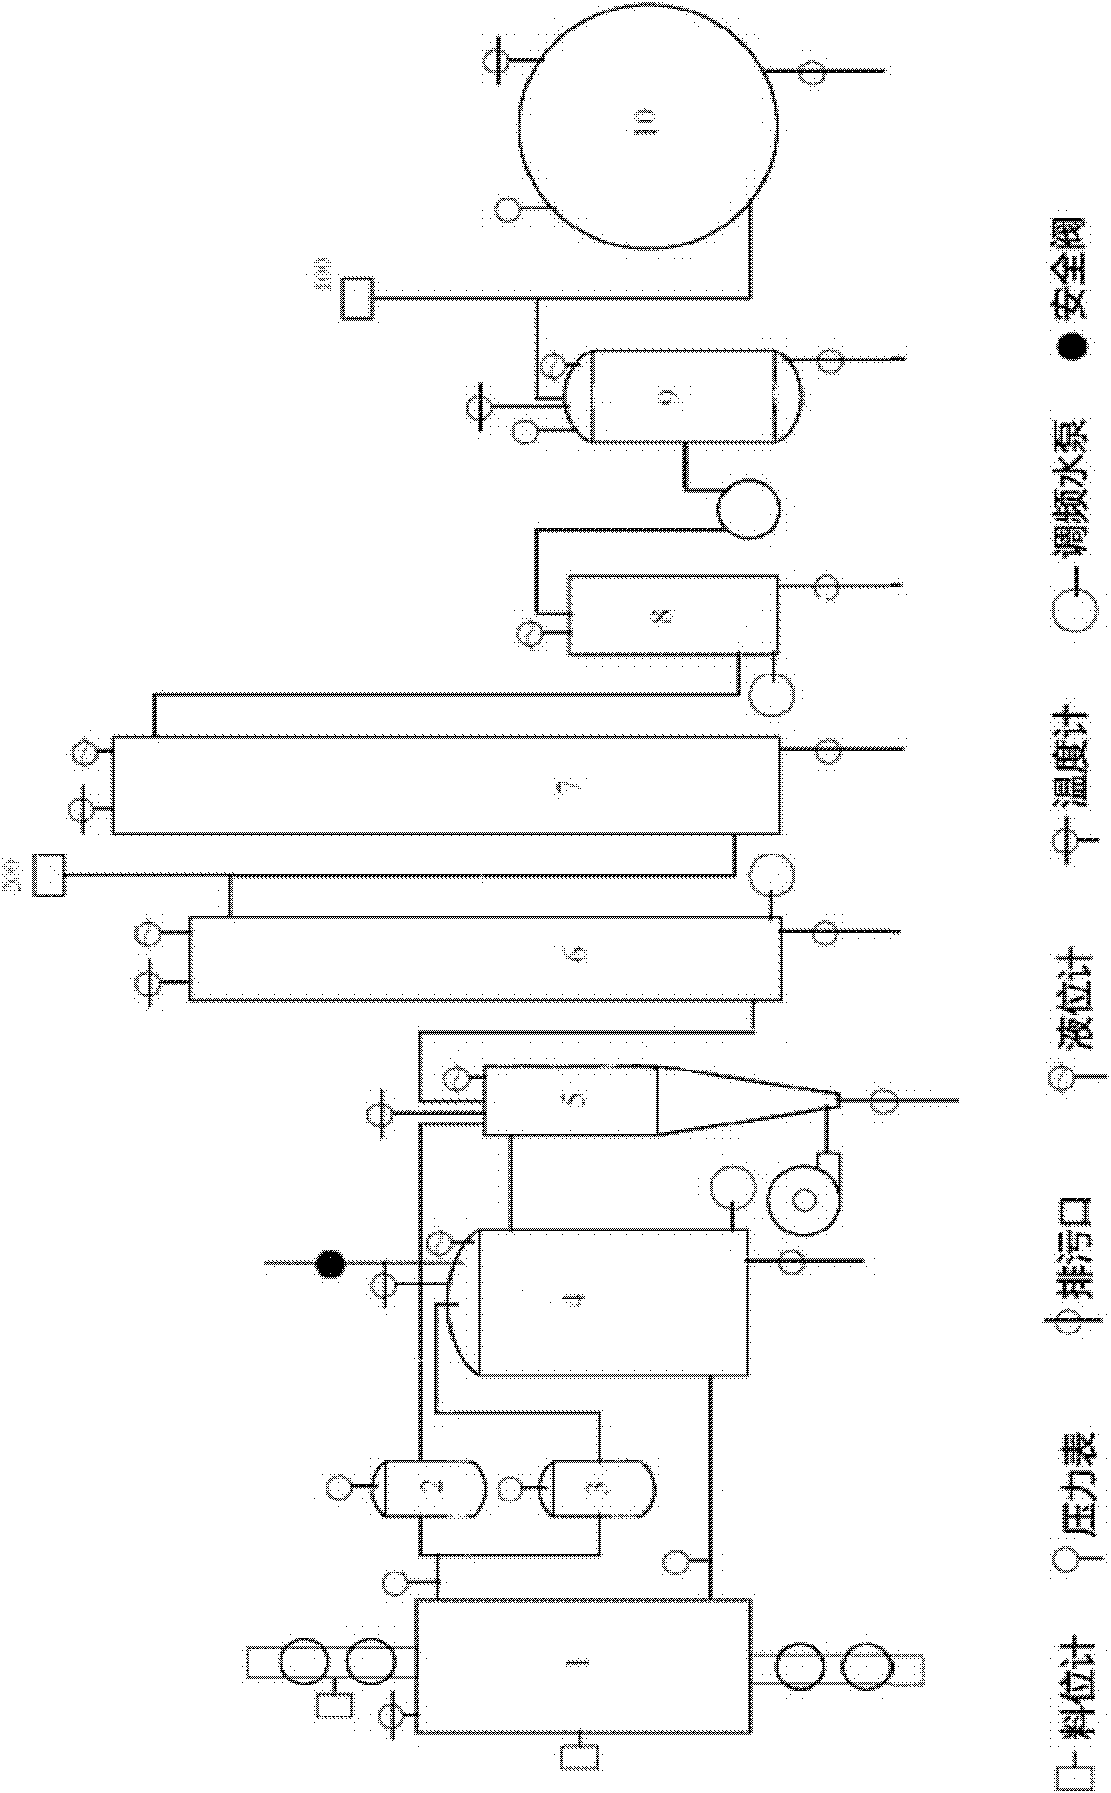 Control method for biomass gasification equipment